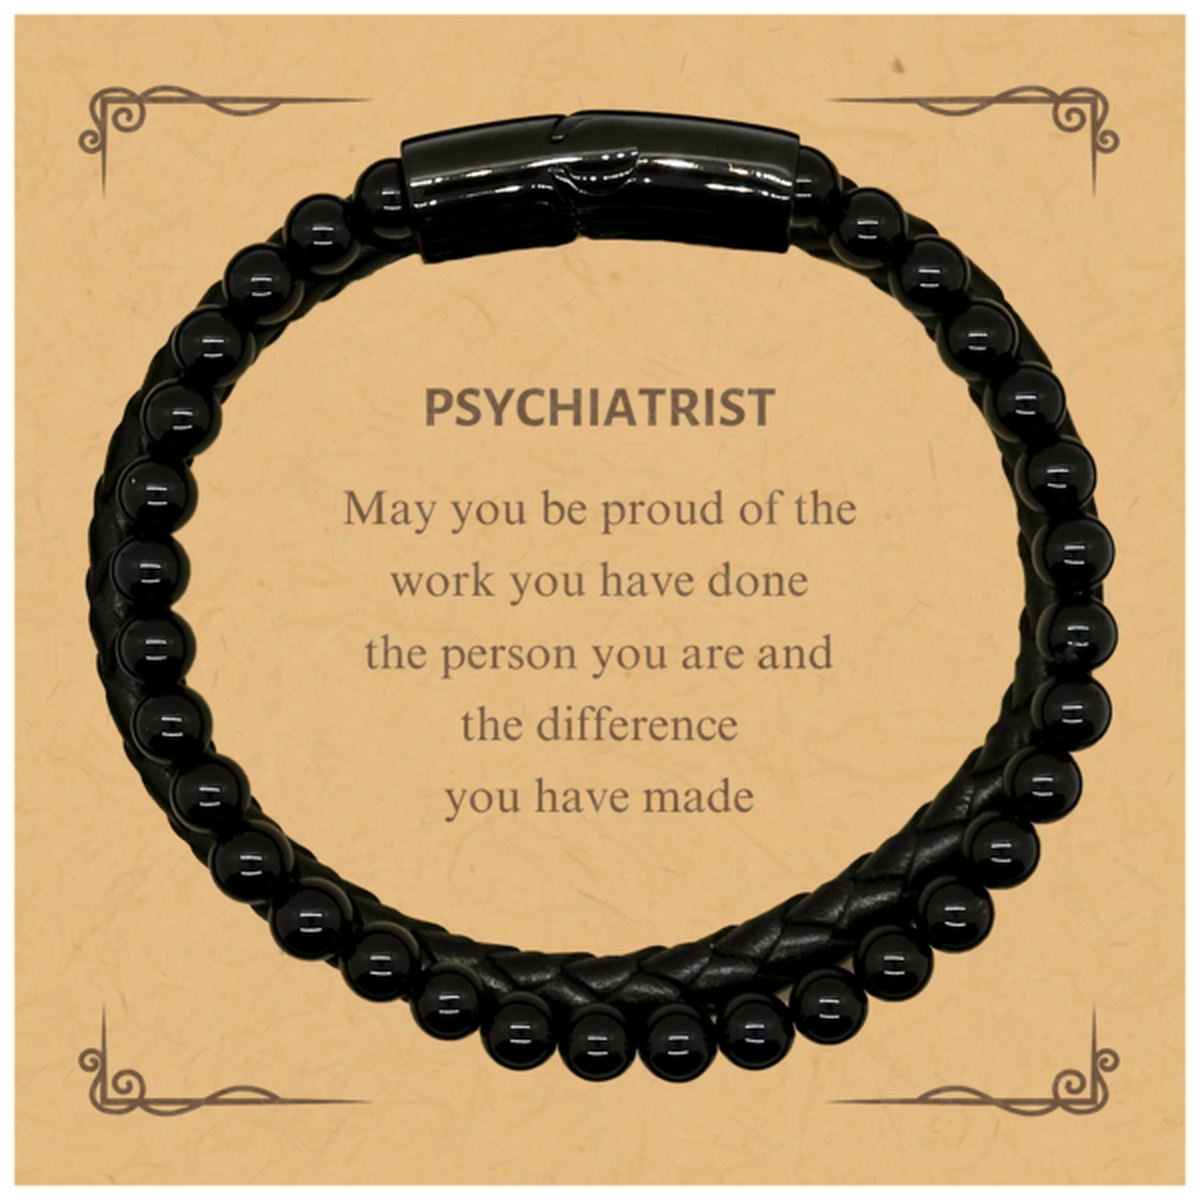 Psychiatrist May you be proud of the work you have done, Retirement Psychiatrist Stone Leather Bracelets for Colleague Appreciation Gifts Amazing for Psychiatrist